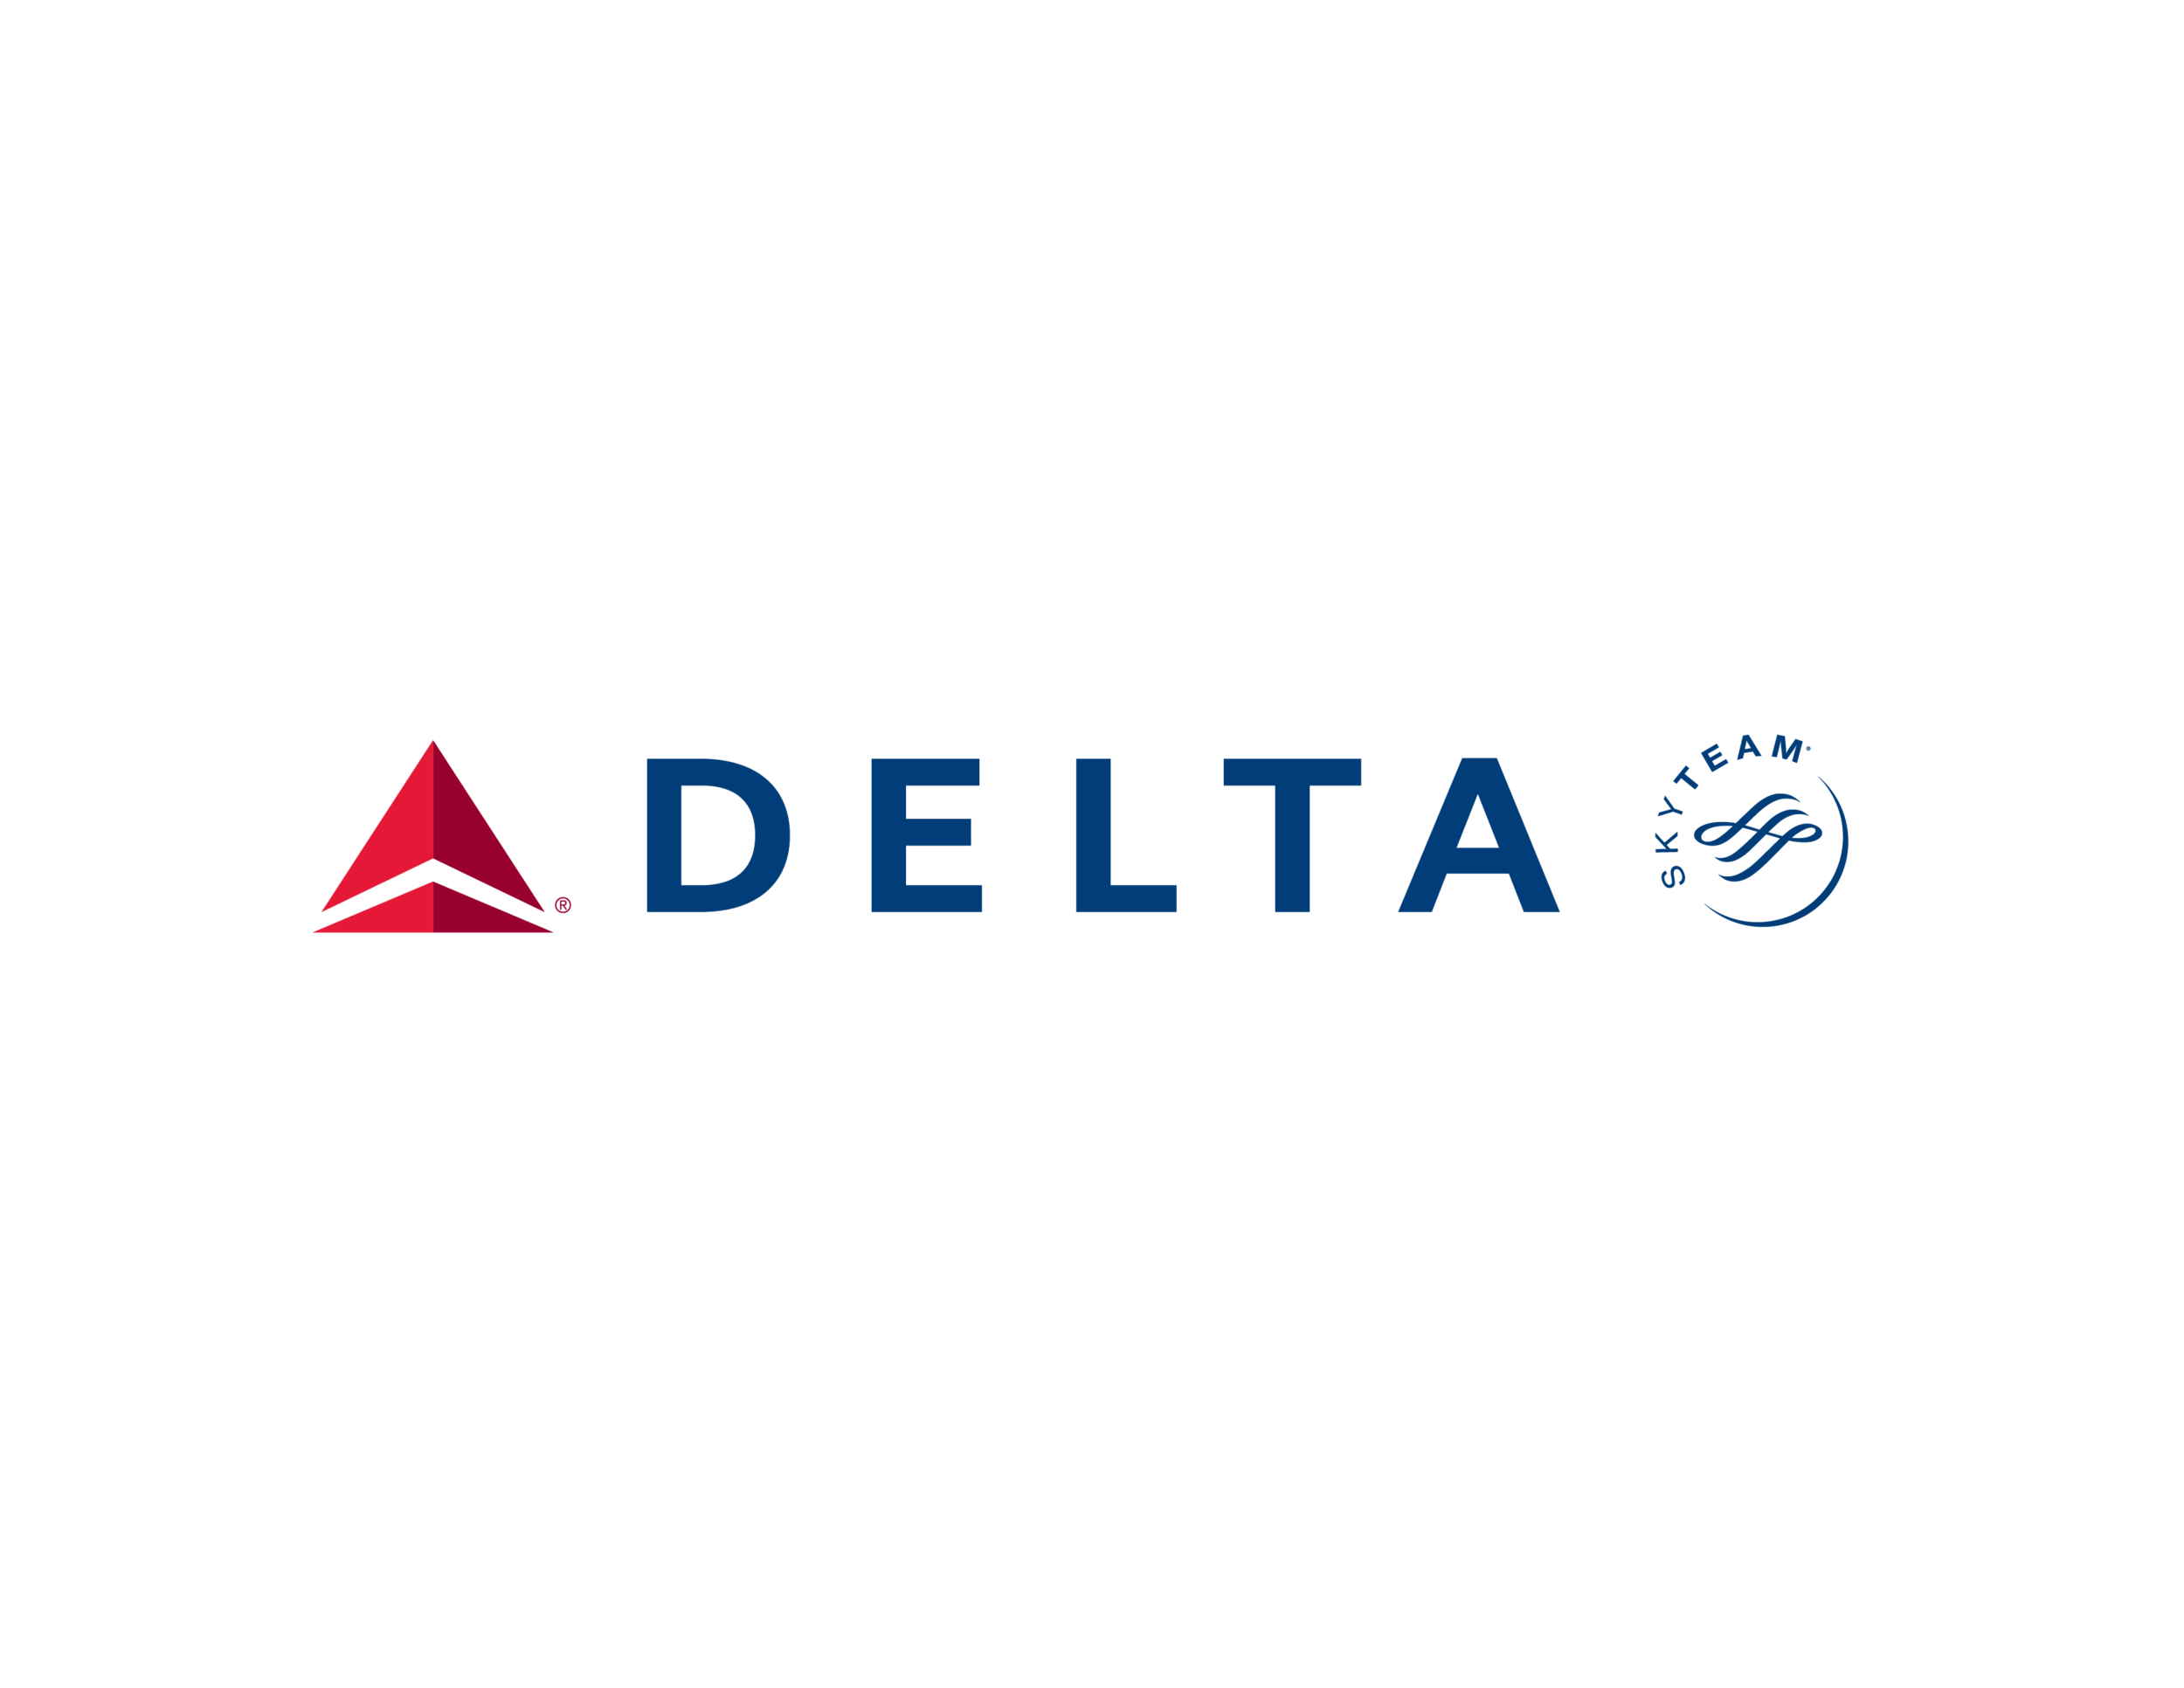 Delta_c_r_st [Converted]-01.png